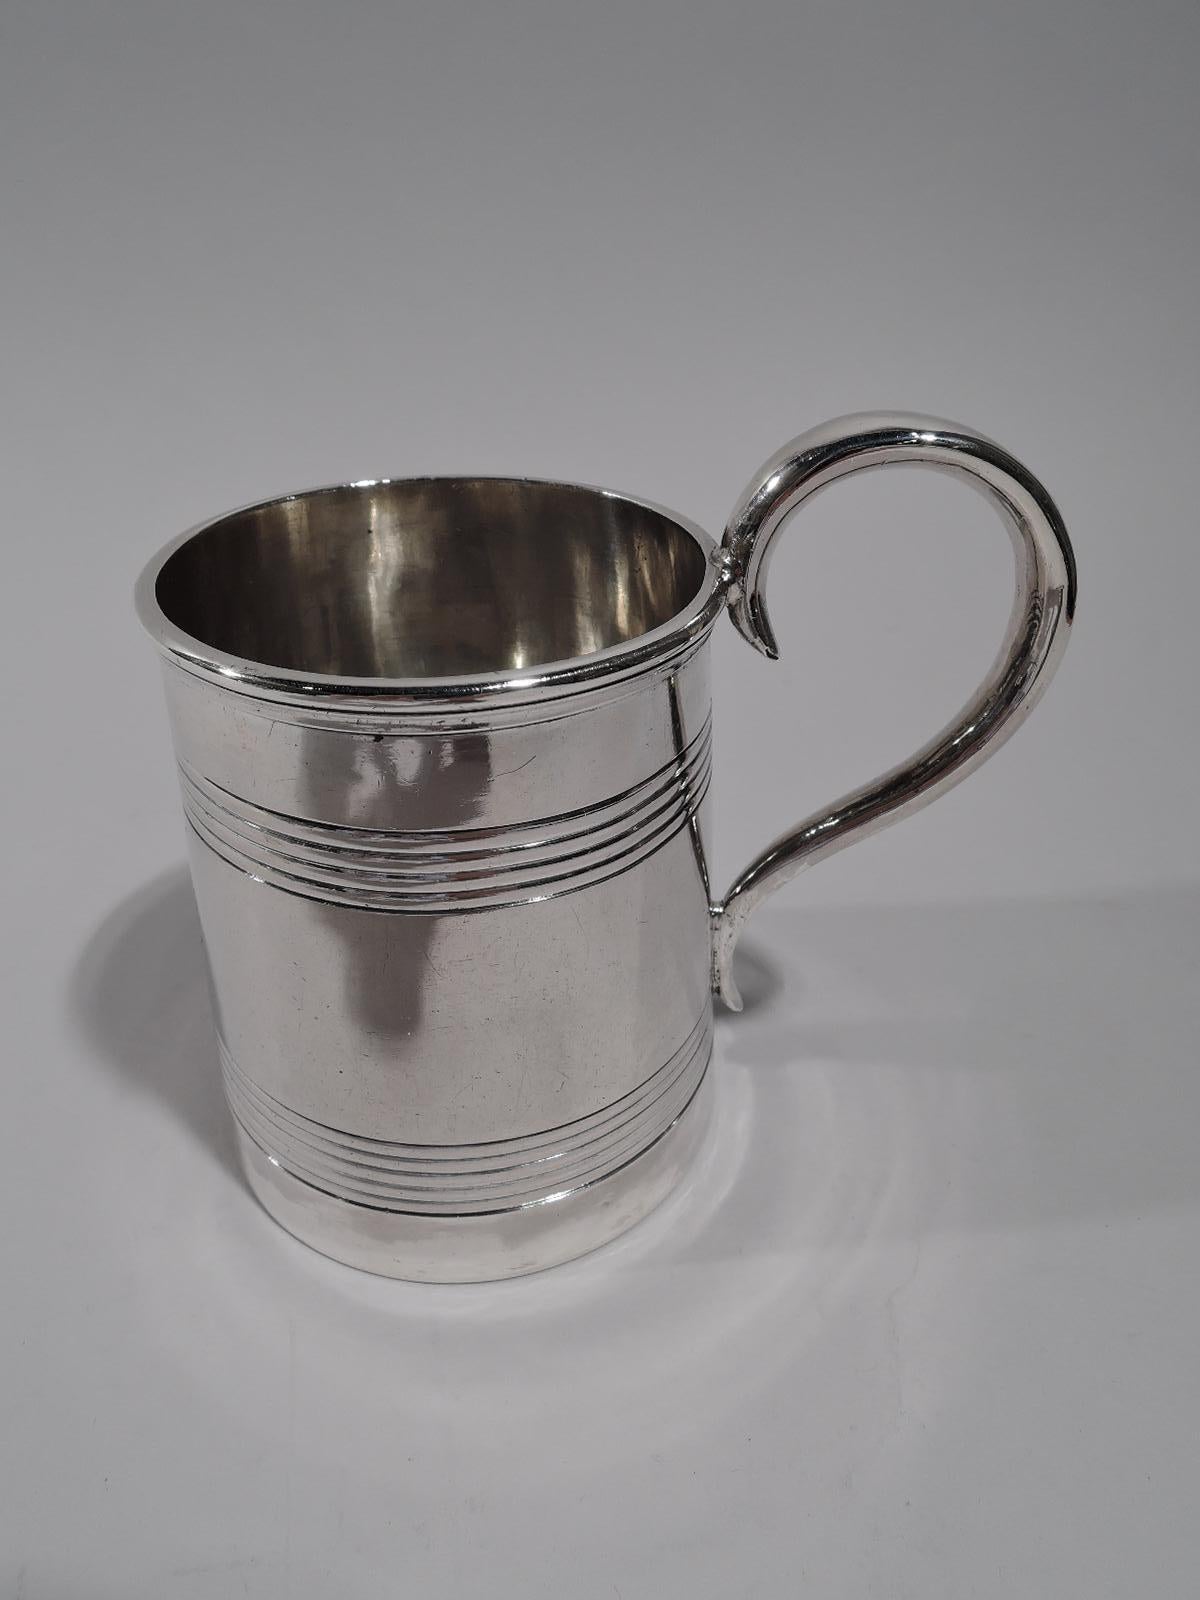 Traditional coin silver baby cup. Made by George Sharp for Bailey & Co. in Philadelphia. Straight and upward tapering sides with reeded bands and high-looping handle. A popular Georgian form that remained in production for many years. Sharp worked